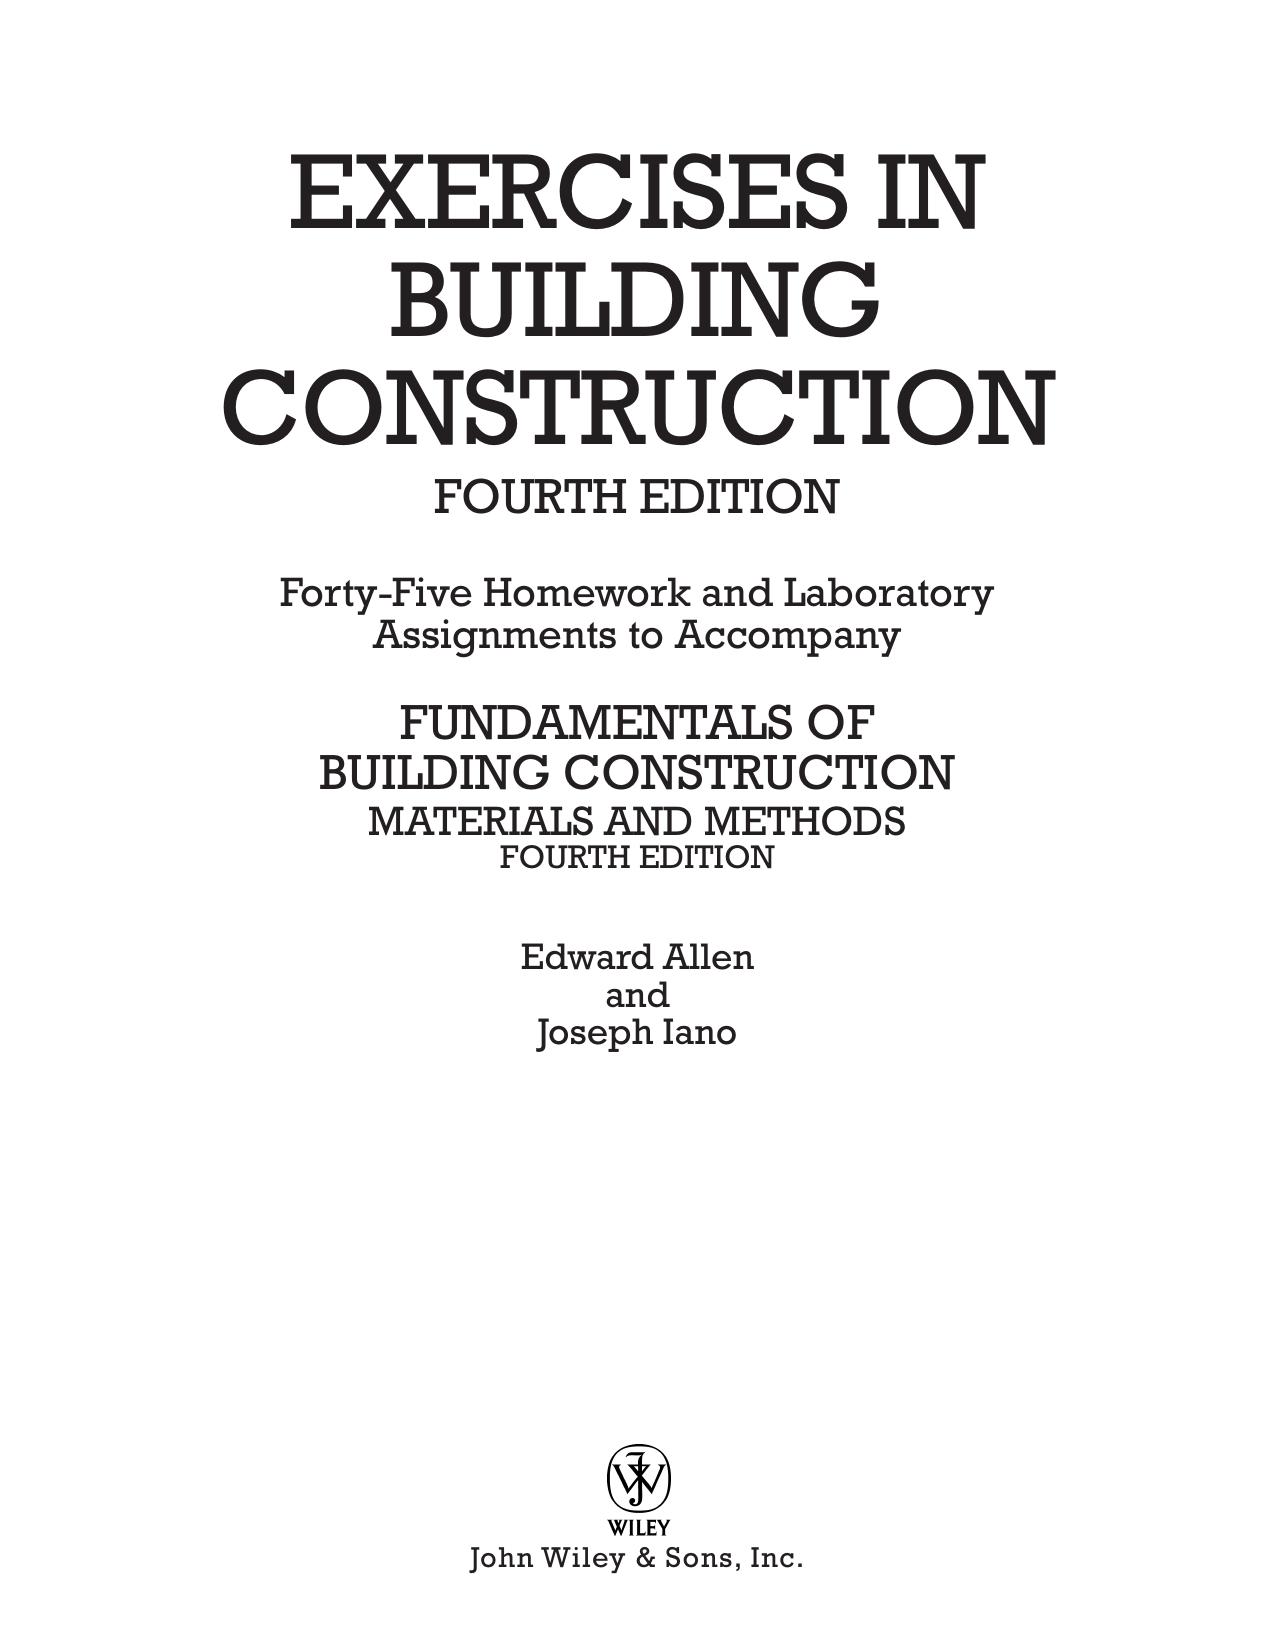 Exercises in Building Construction Materials and Methods by Edward Allen 4th ed 2004